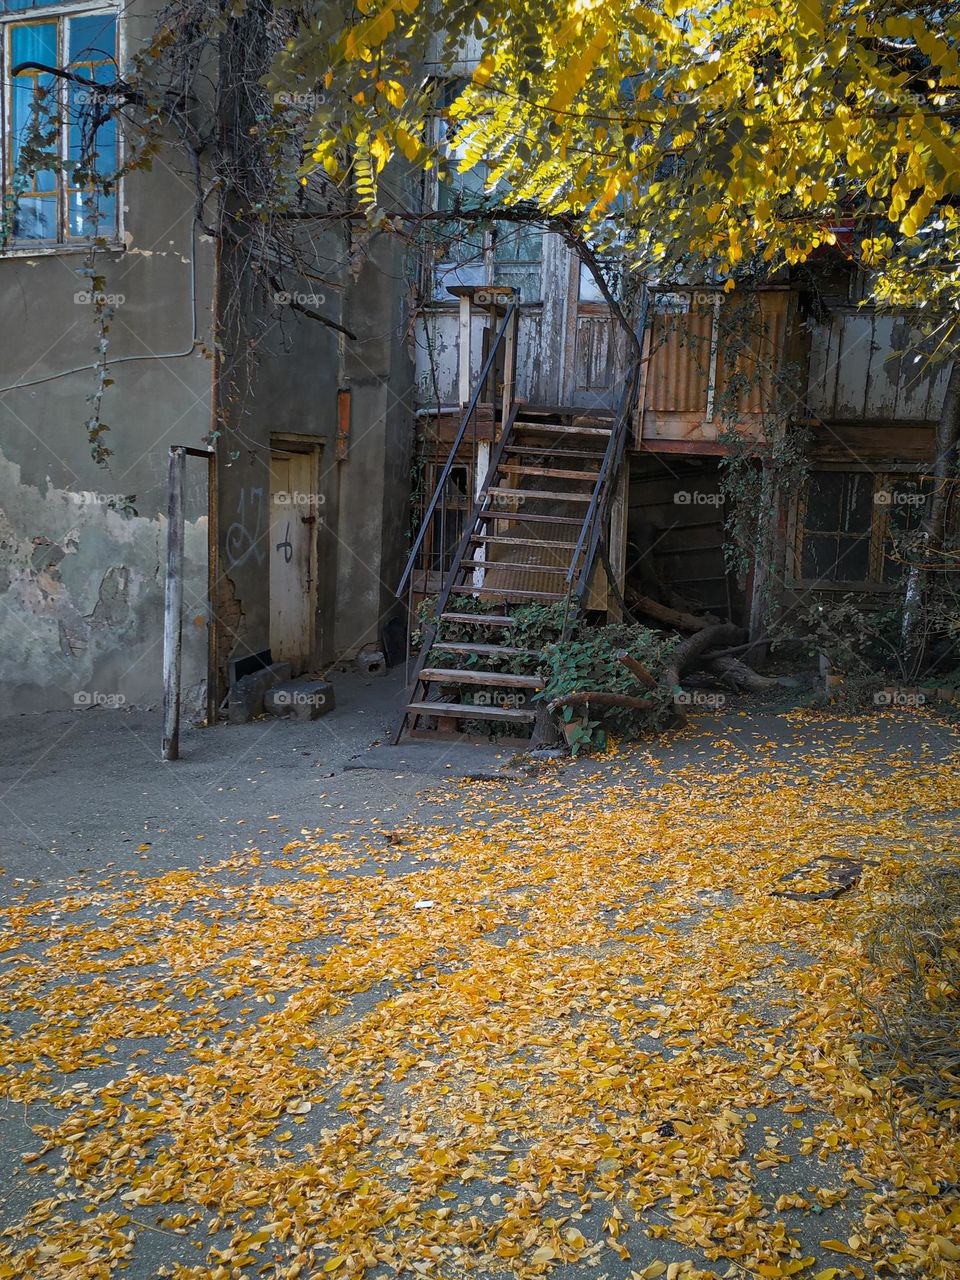 An interesting old house against the background of yellow autumn leaves